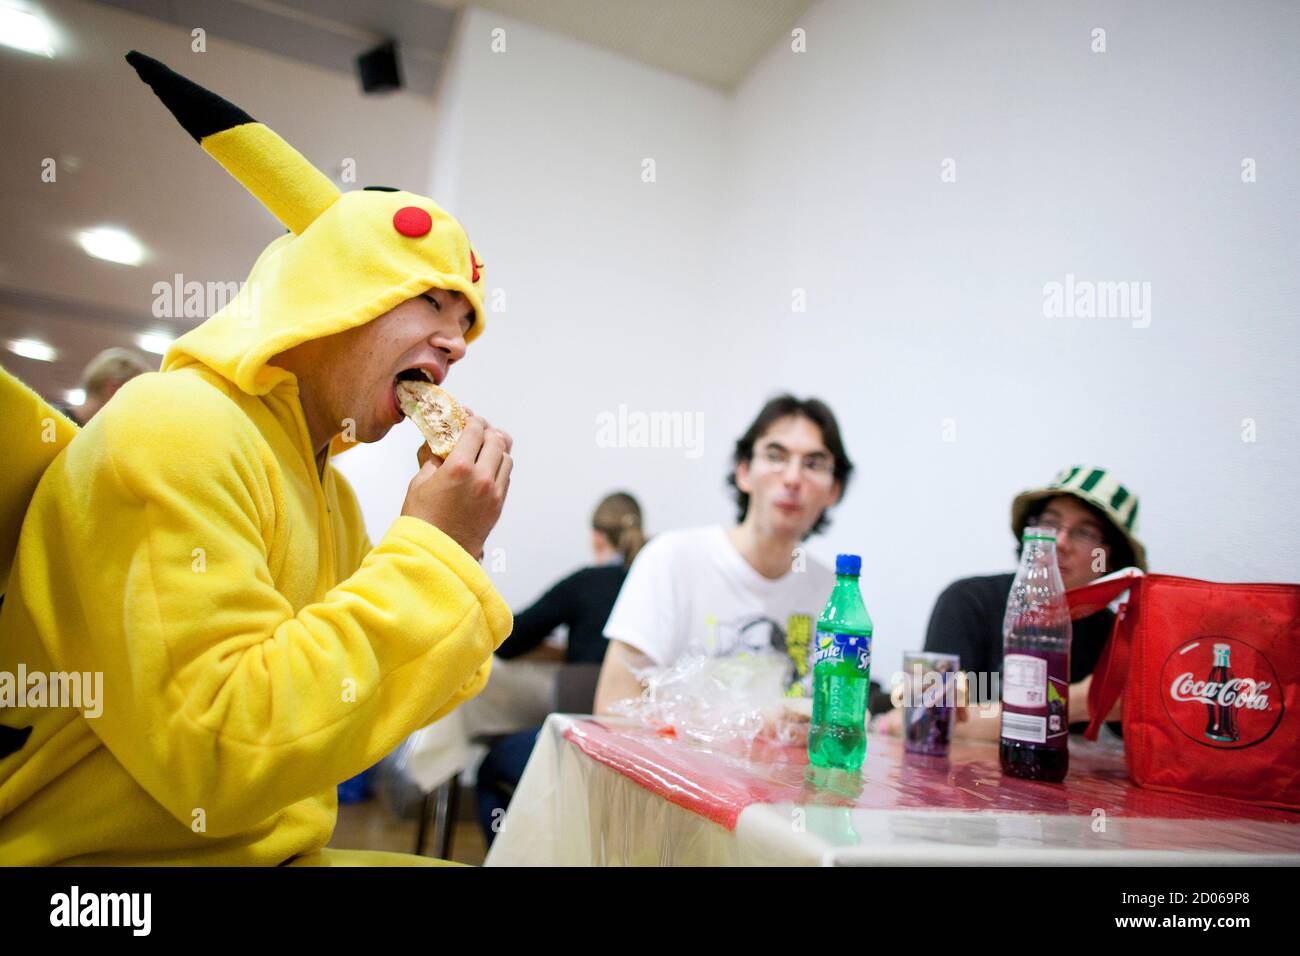 A visitor dressed as Pikachu eats a sandwich at the Polymanga show in  Lausanne, April 23, 2011. Polymanga is the largest manga, anime, video games  and pop culture convention in Switzerland gathering